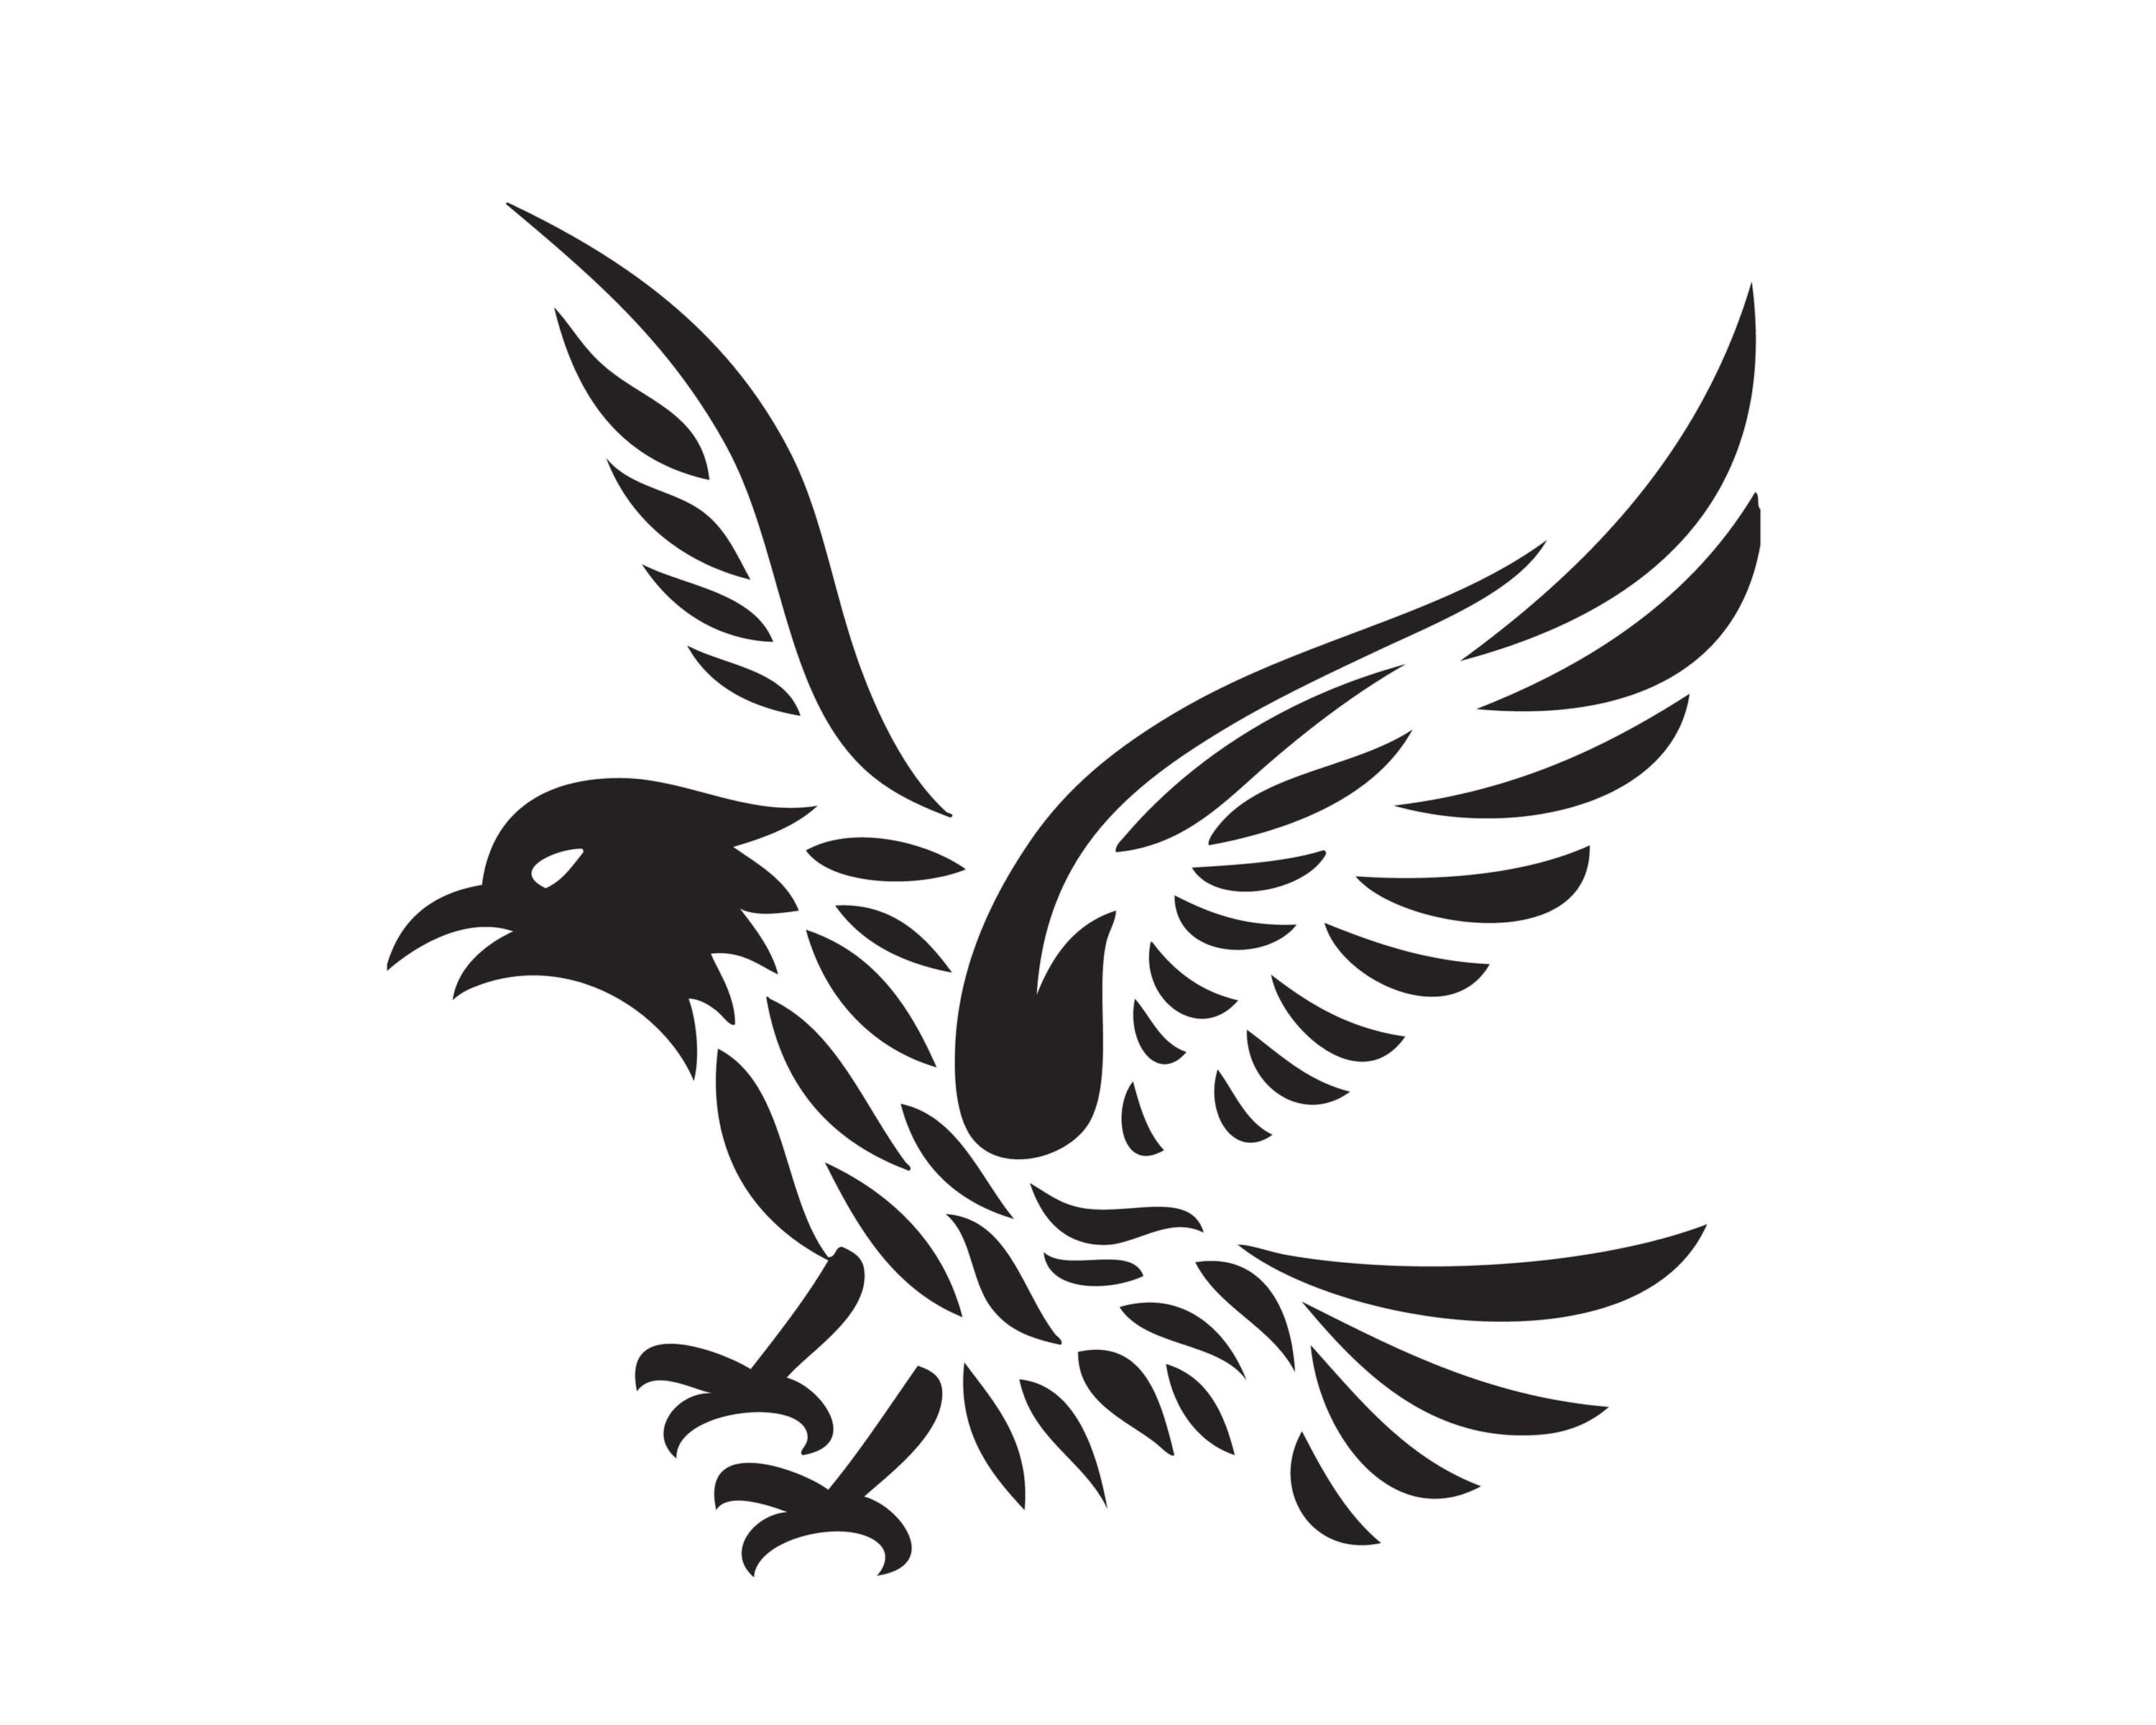 1. Eagle Tattoo Designs for Women - wide 3